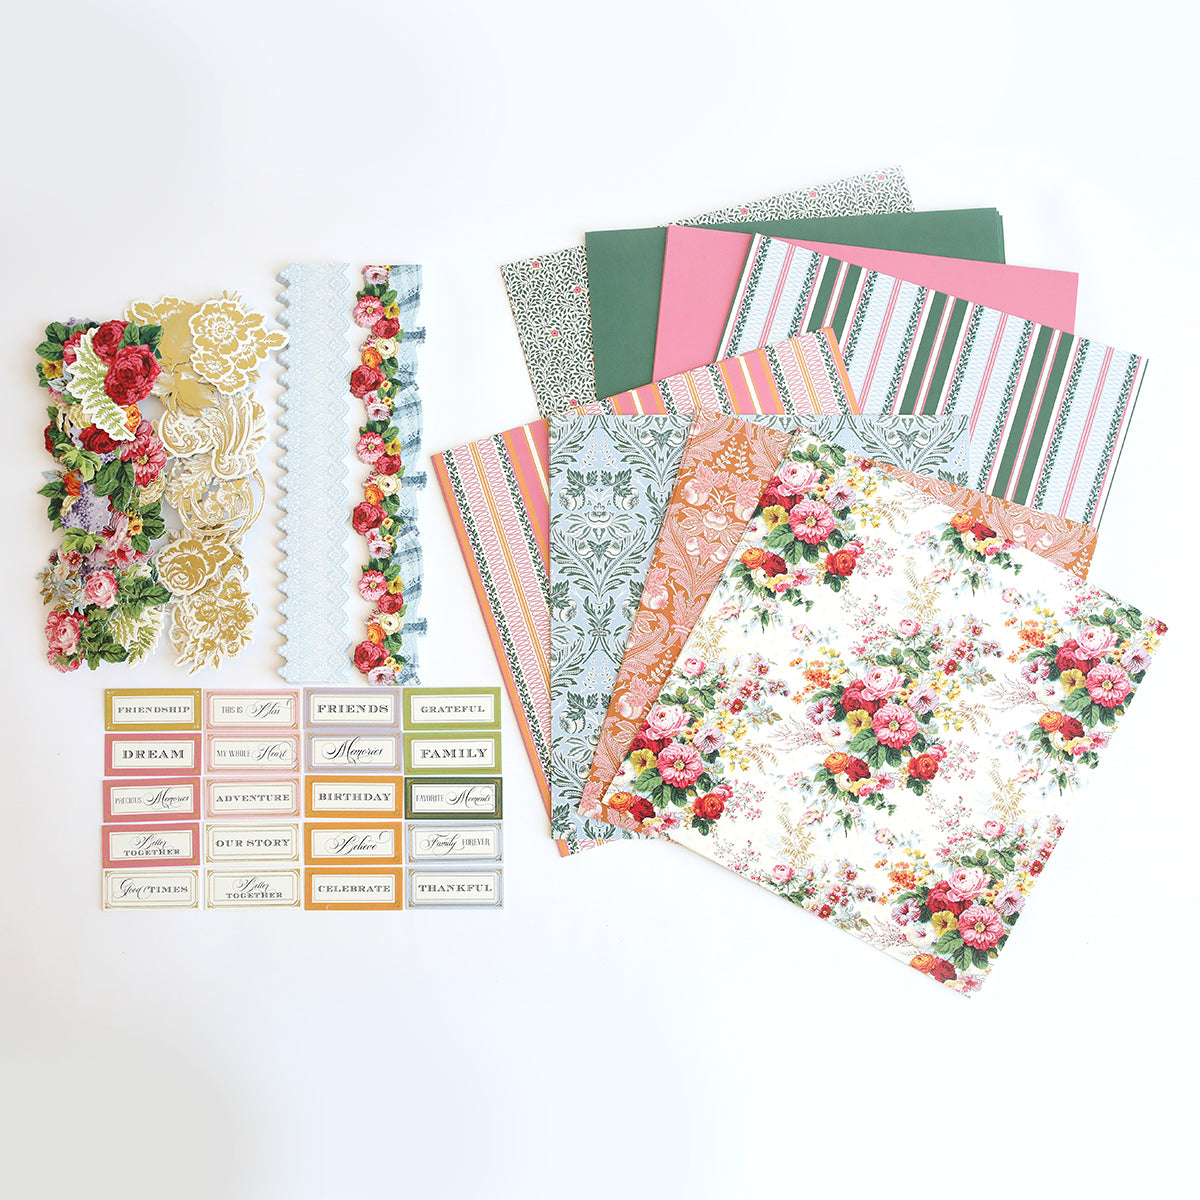 The Annalise 12x12 Cardstock and Embellishments collection features a stunning assortment of papers and cards adorned with beautiful floral designs and embellishments.